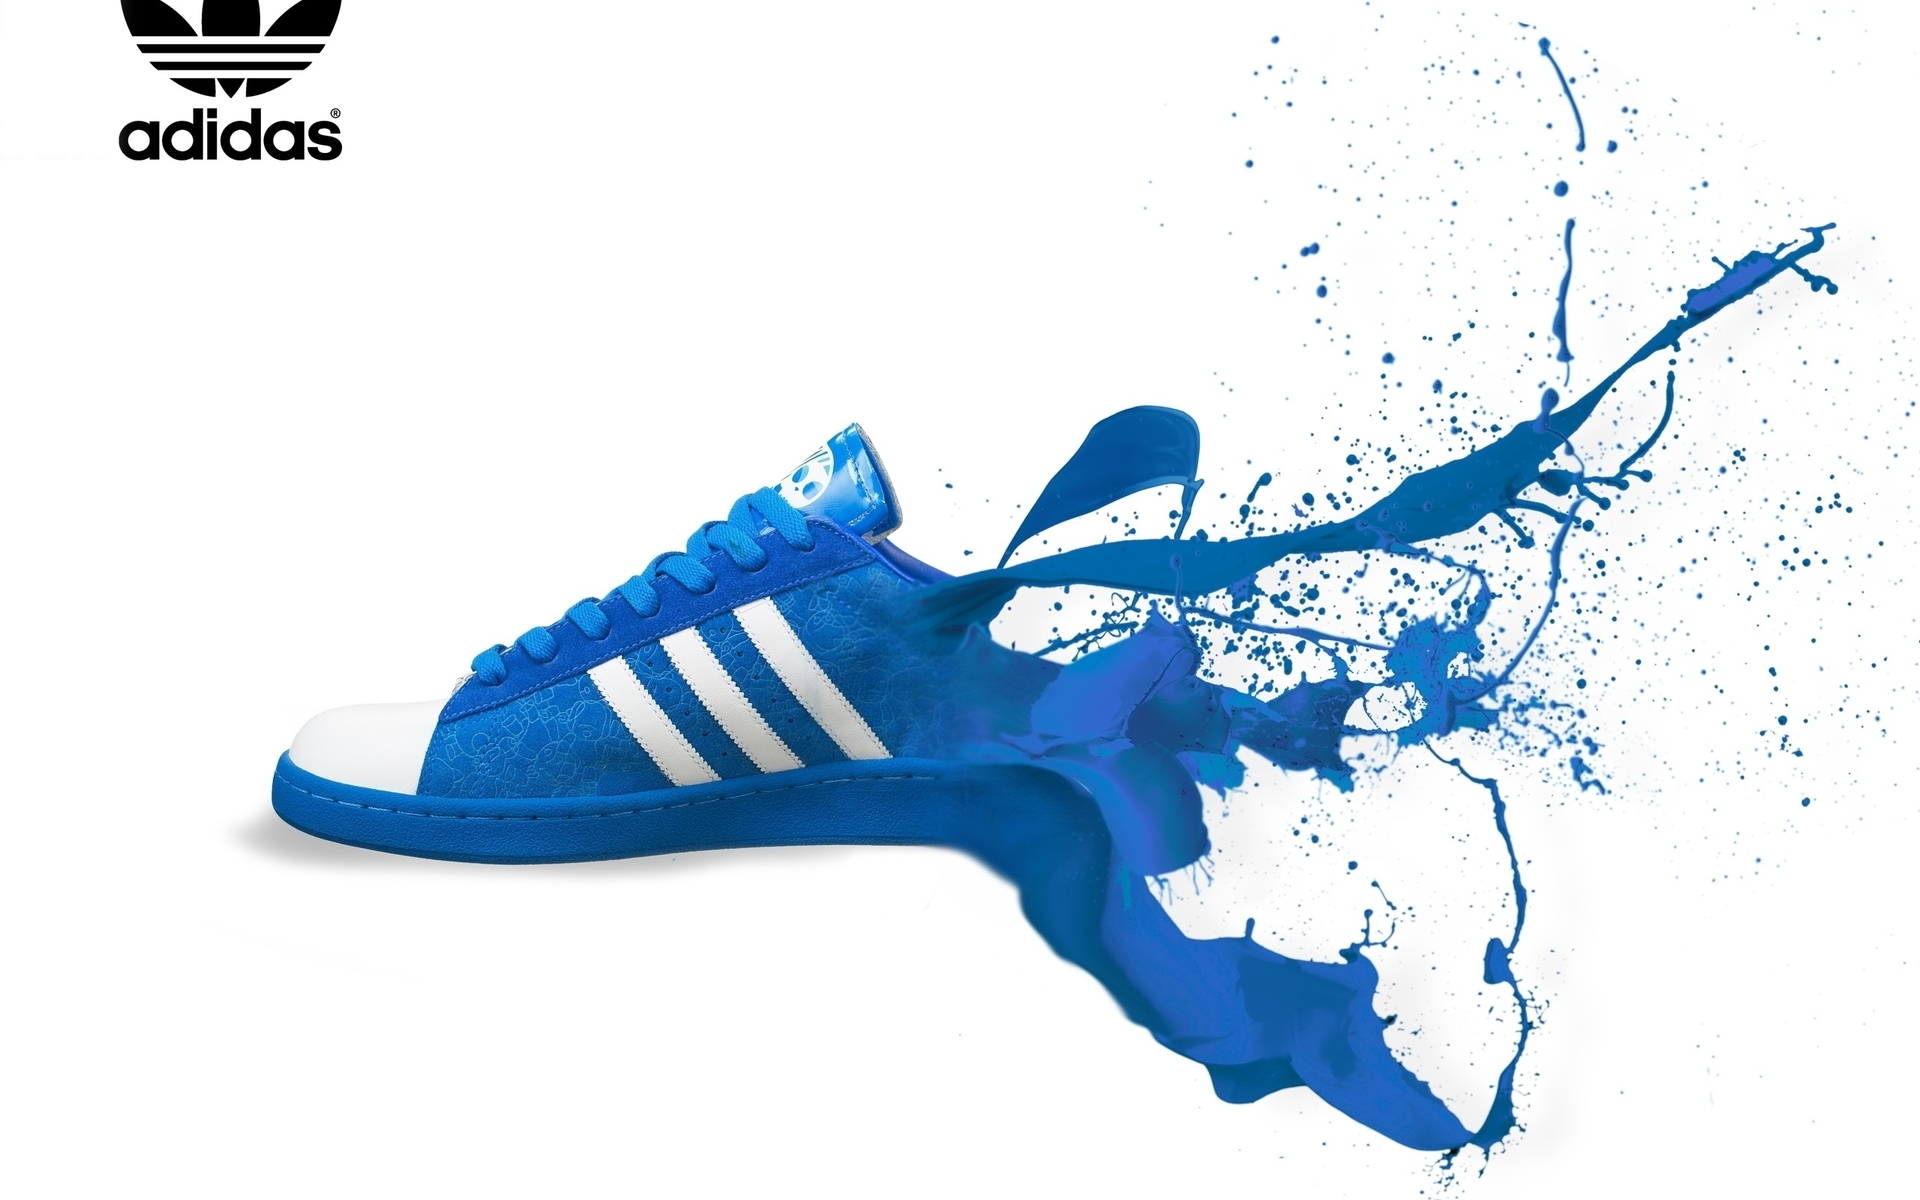 Wallpapers Adidas shoes sneakers on the desktop